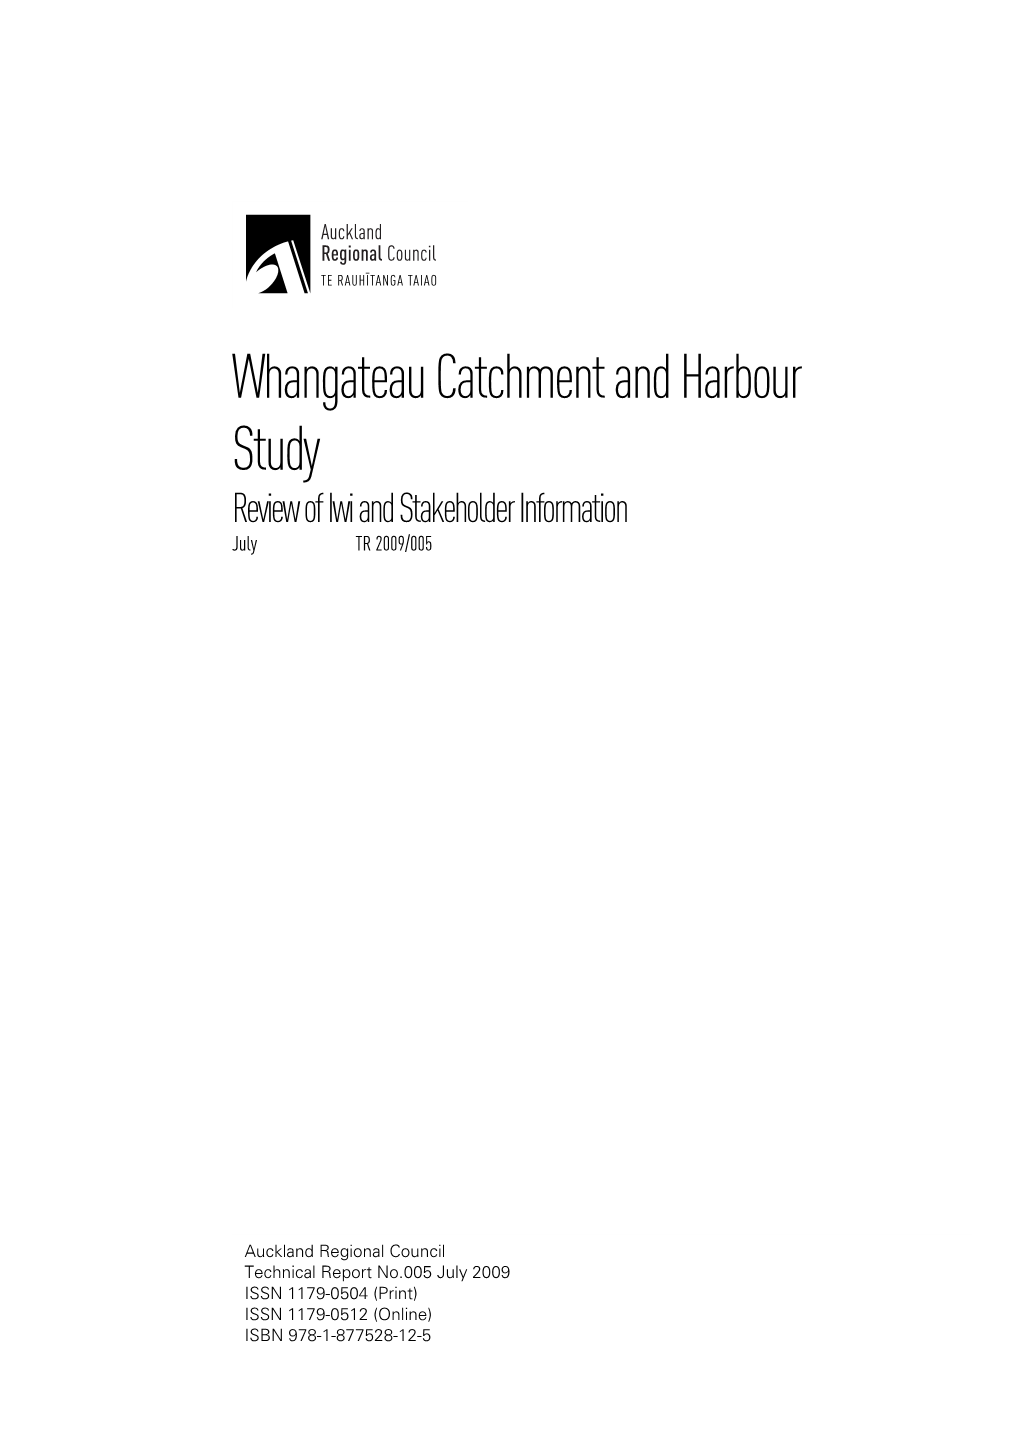 Whangateau Catchment and Harbour Study Review of Iwi and Stakeholder Information July TR 2009/005